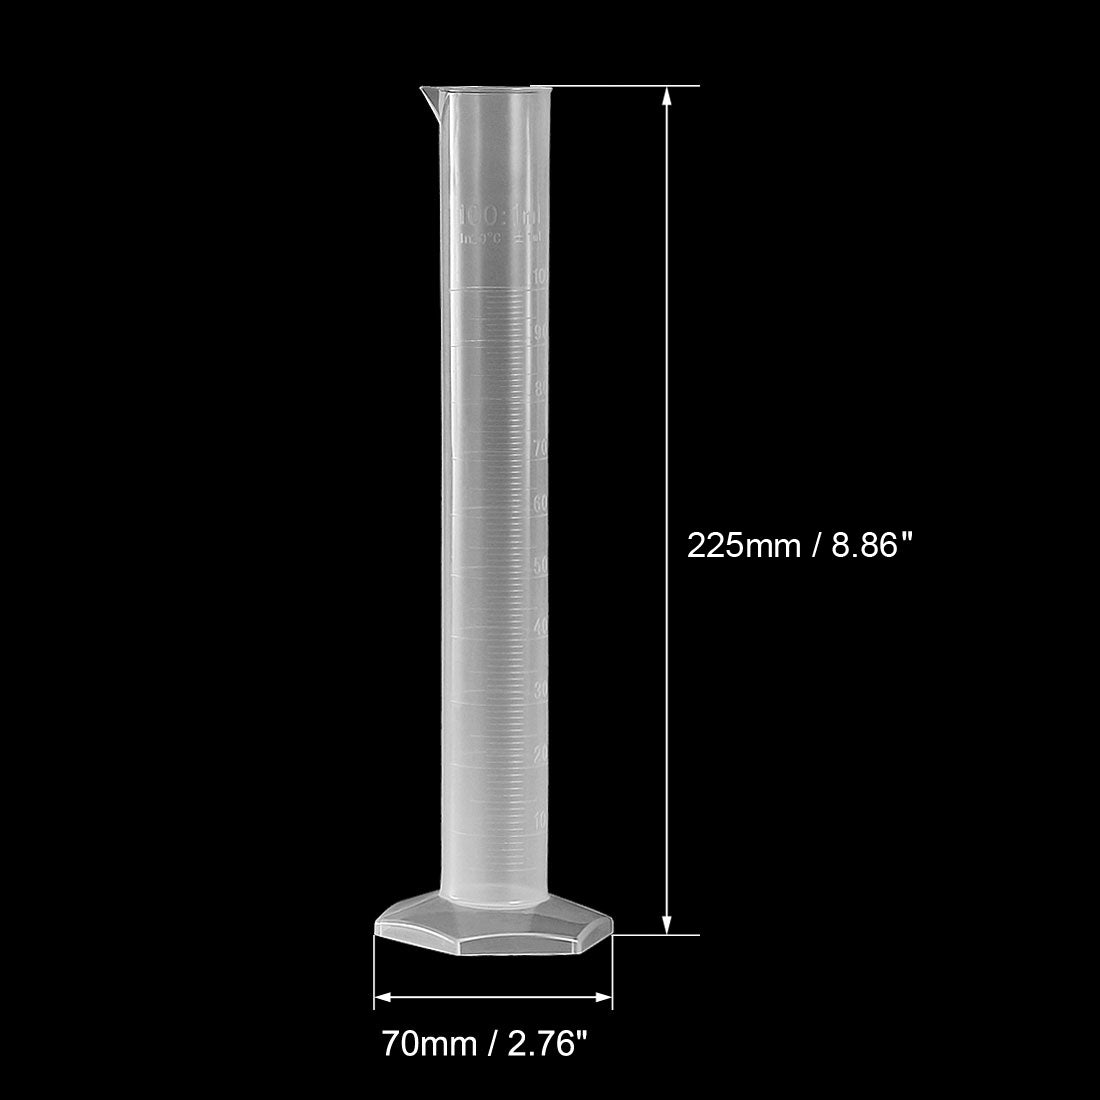 uxcell Uxcell 100ml Laboratory Measurements Clear White Plastic Hex Base Graduated Cylinder for Chemical Measuring